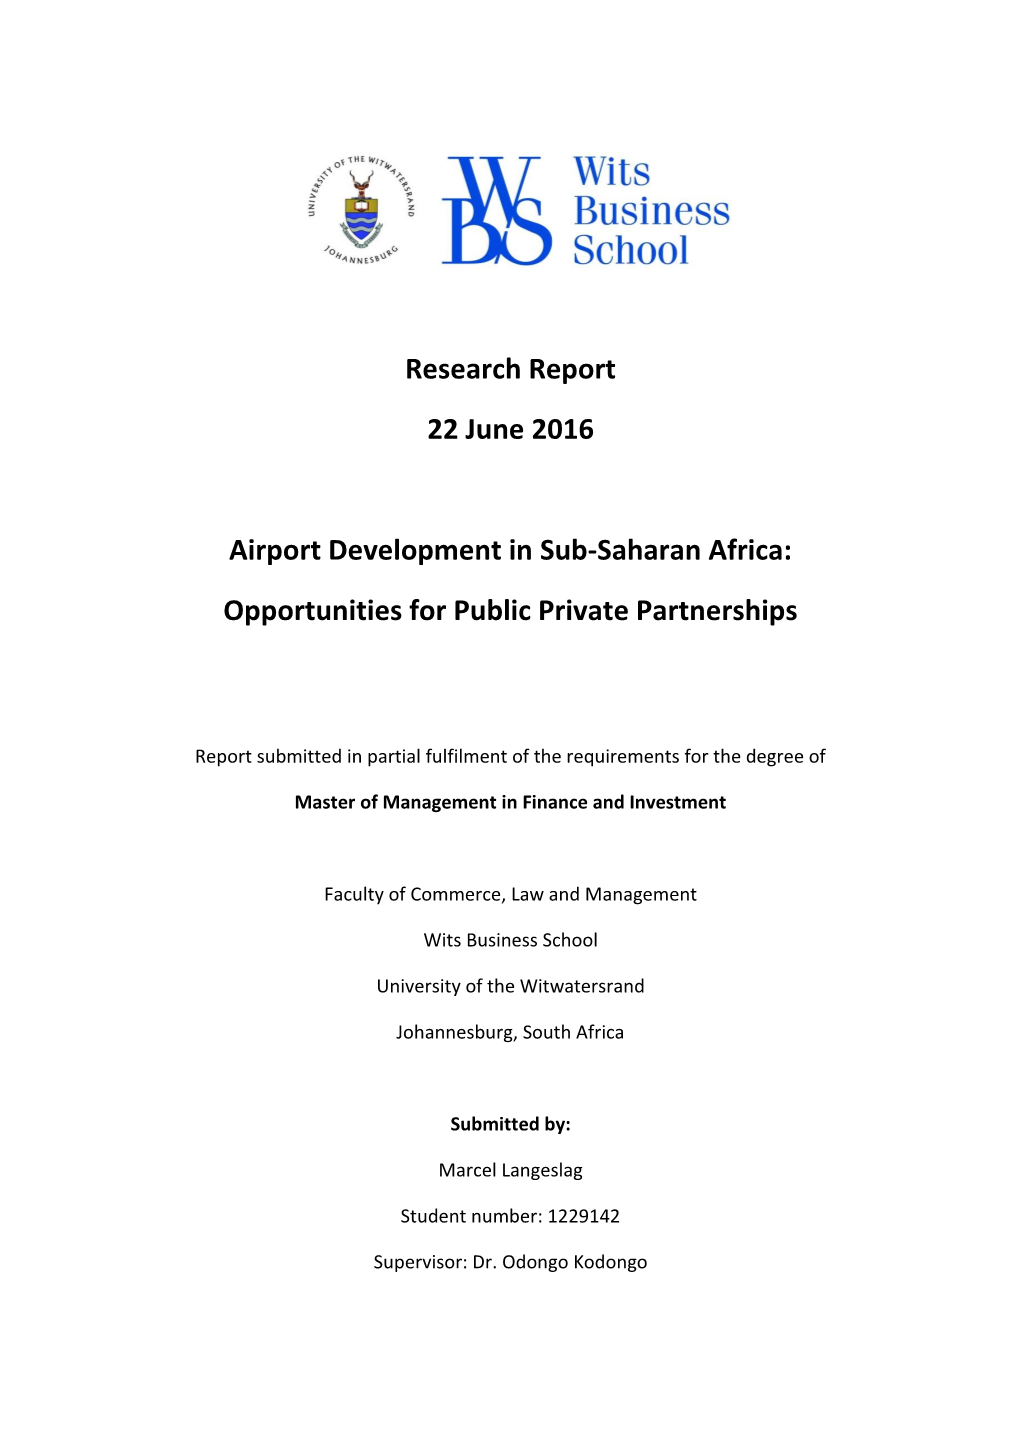 Airport Development in Sub-Saharan Africa: Opportunities for Public Private Partnerships